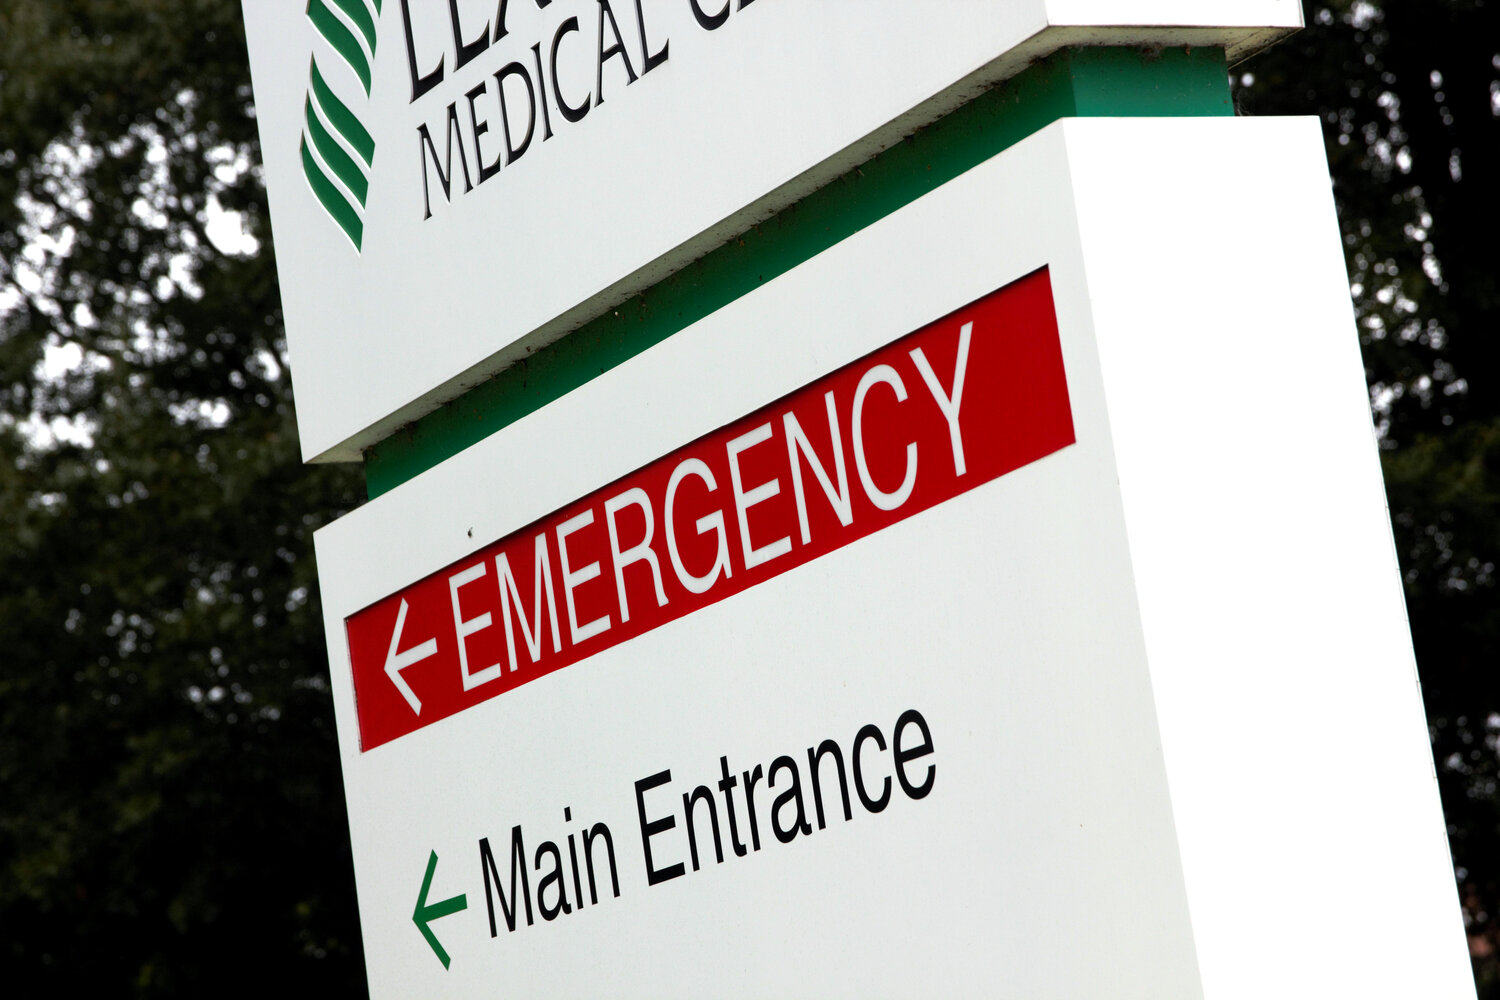 Chapin residents continue to voice their concerns about EMS response times in the area, with the Lexington County Ambulance Response Solutions Team holding its latest meeting Sept. 25, continuing to discuss the issues it sees.